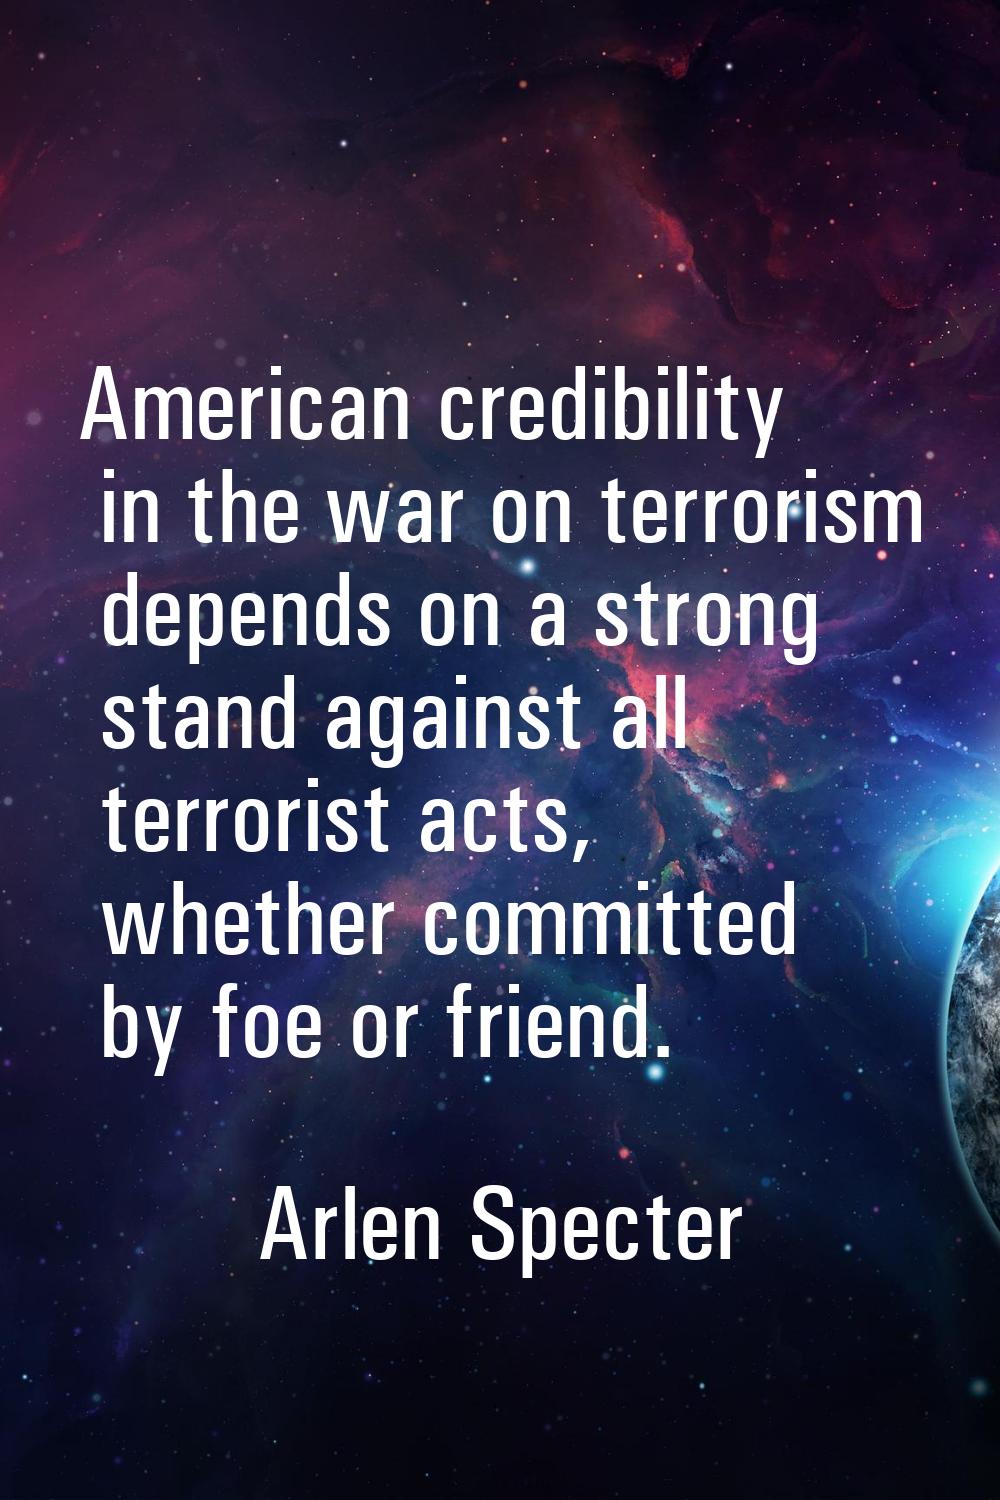 American credibility in the war on terrorism depends on a strong stand against all terrorist acts, 